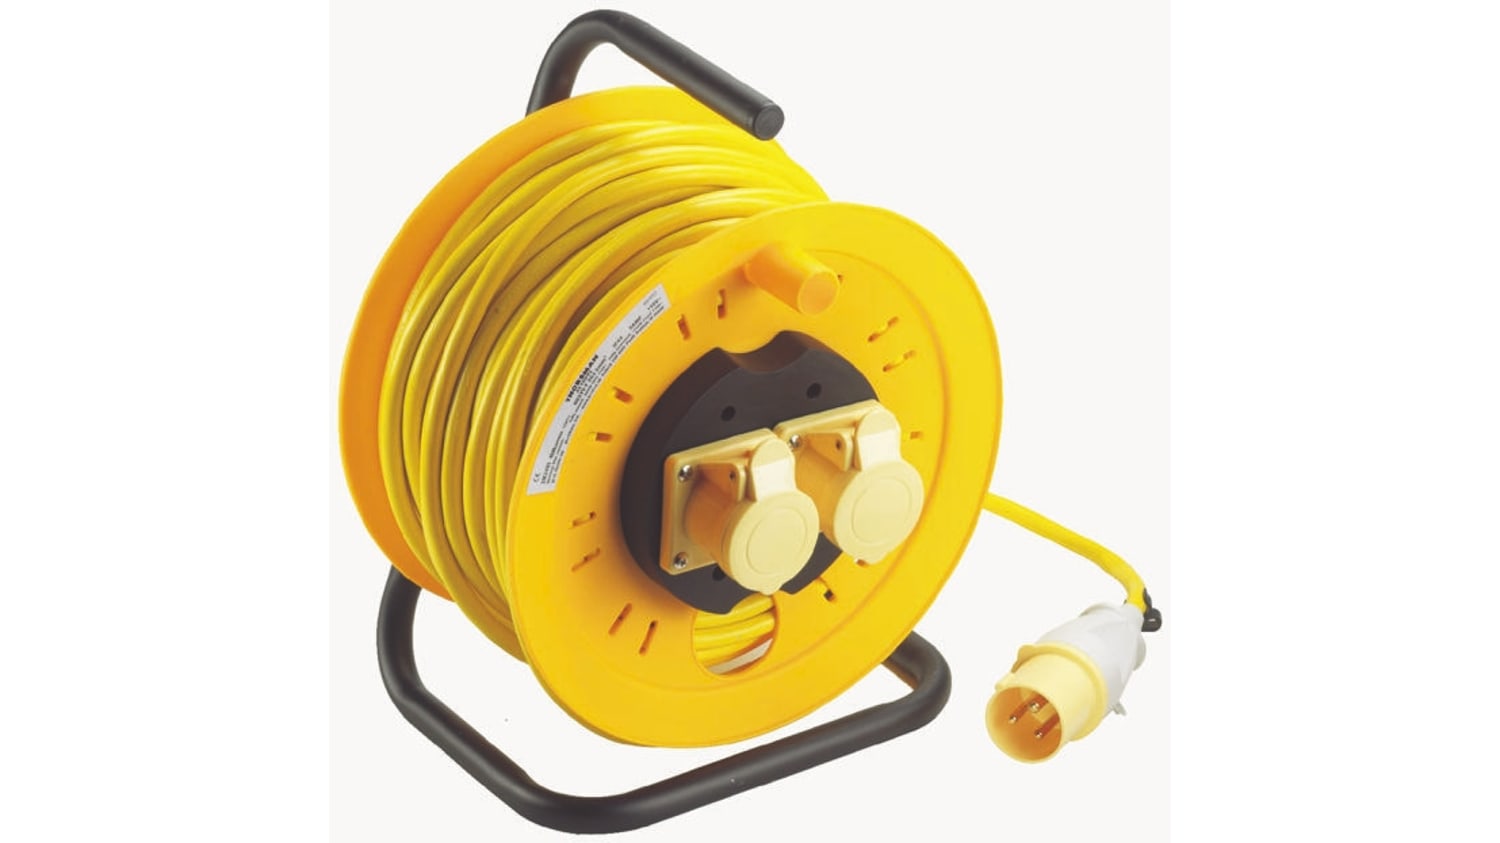 JJR22516 Socket 16A Extension Reel - Coast & Middle East Electrical Devices